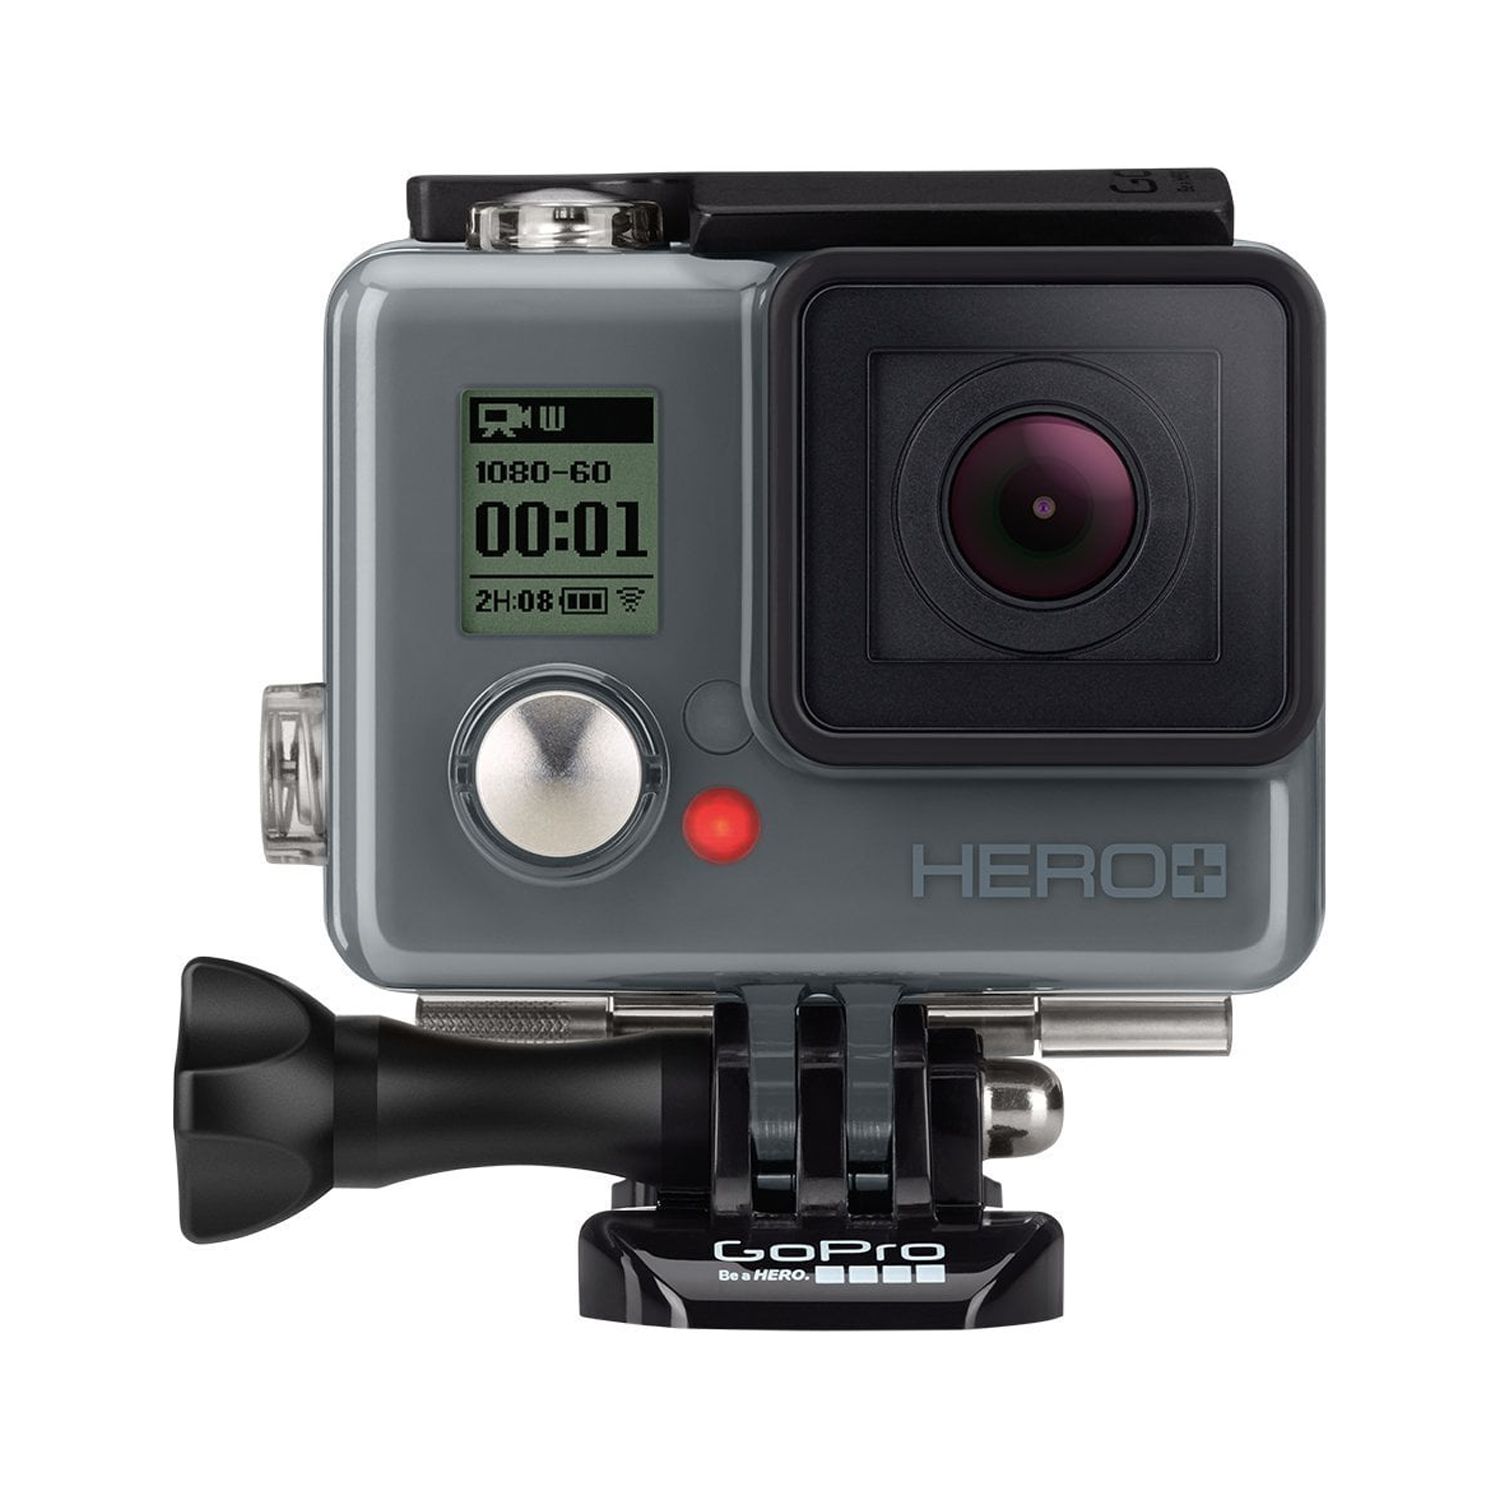 GoPro HERO+ Action Camcorder - image 1 of 3